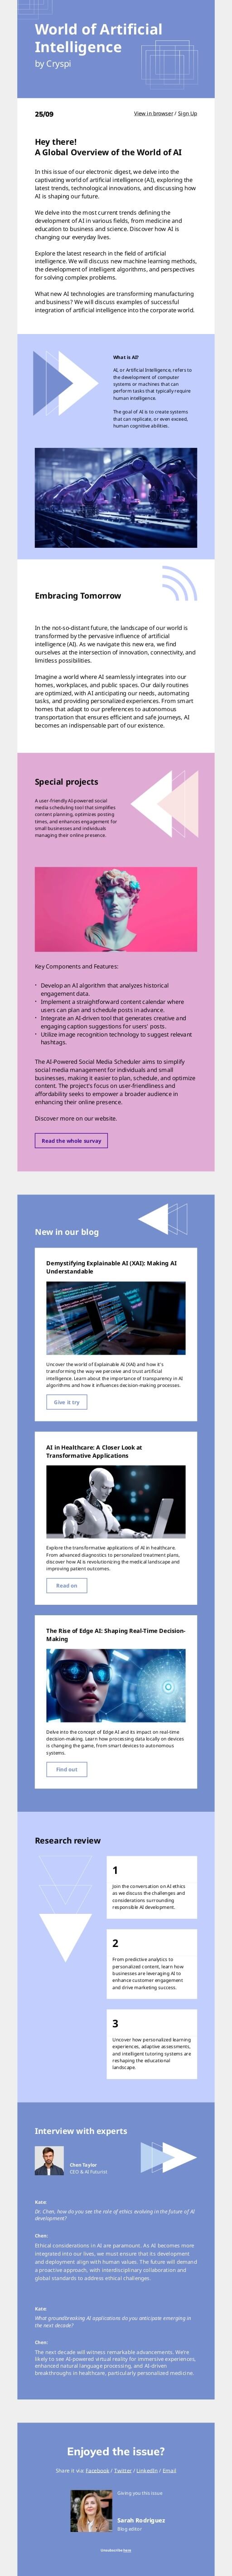 A responsive email template with an informative article on AI.